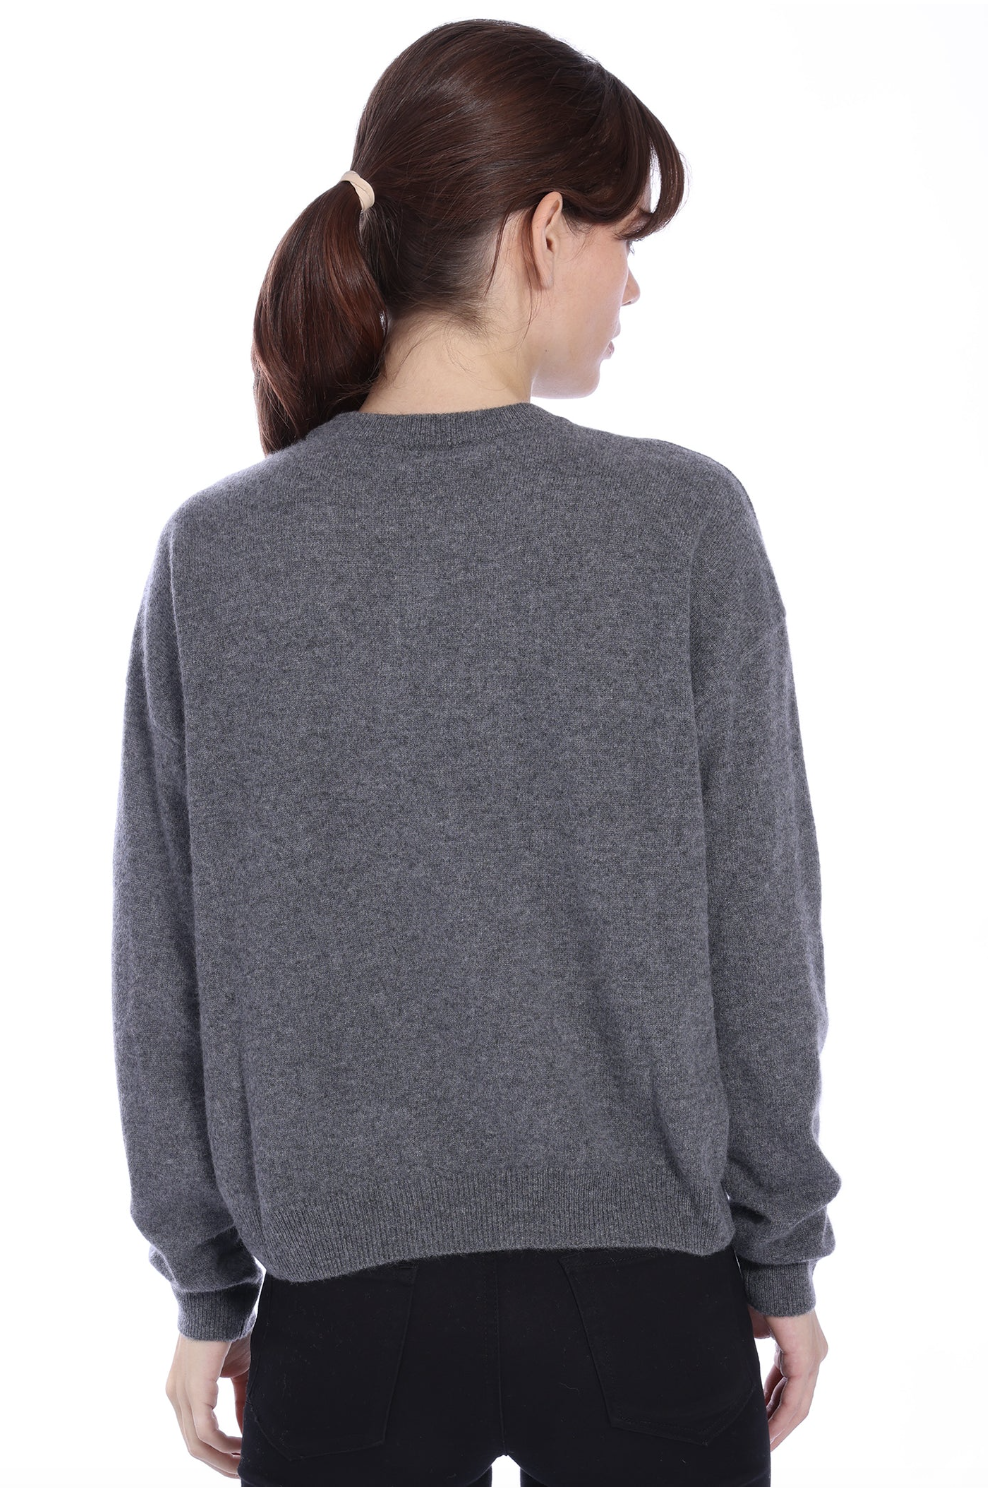 CASHMERE BOXY PULLOVER W/ PATCHES IN CHARCOAL HEARTHER GREY - Romi Boutique